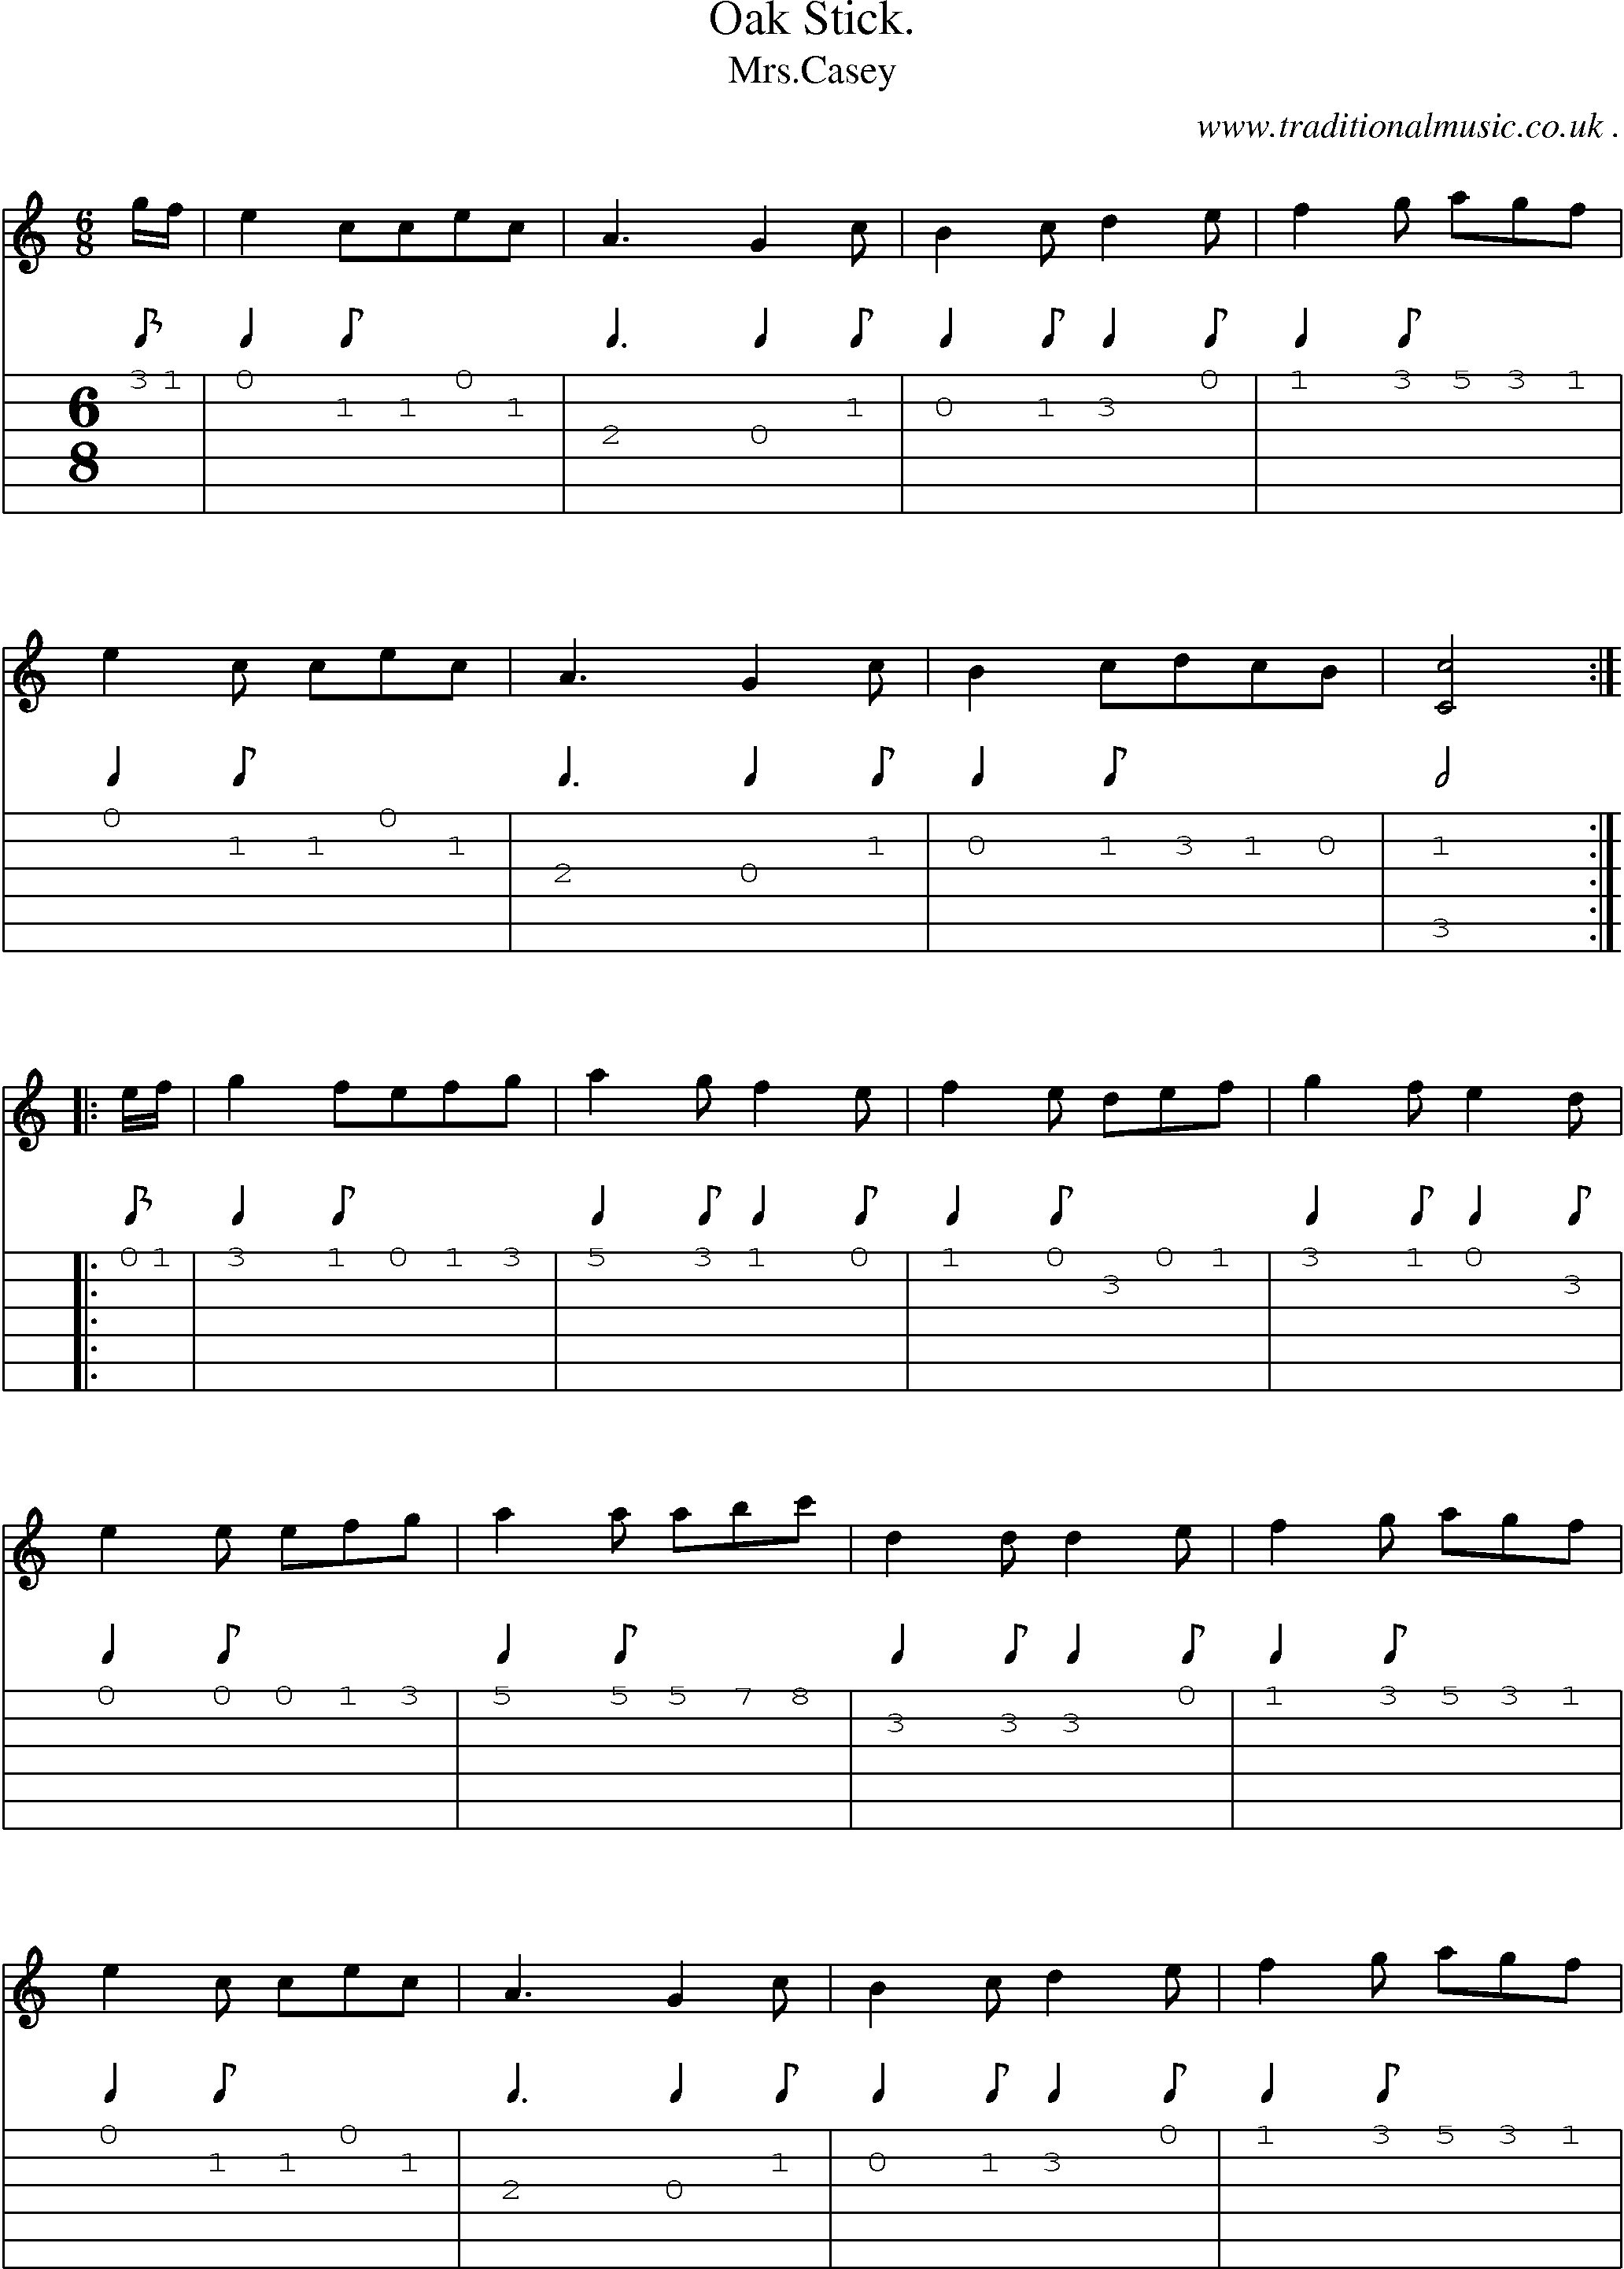 Sheet-Music and Guitar Tabs for Oak Stick 